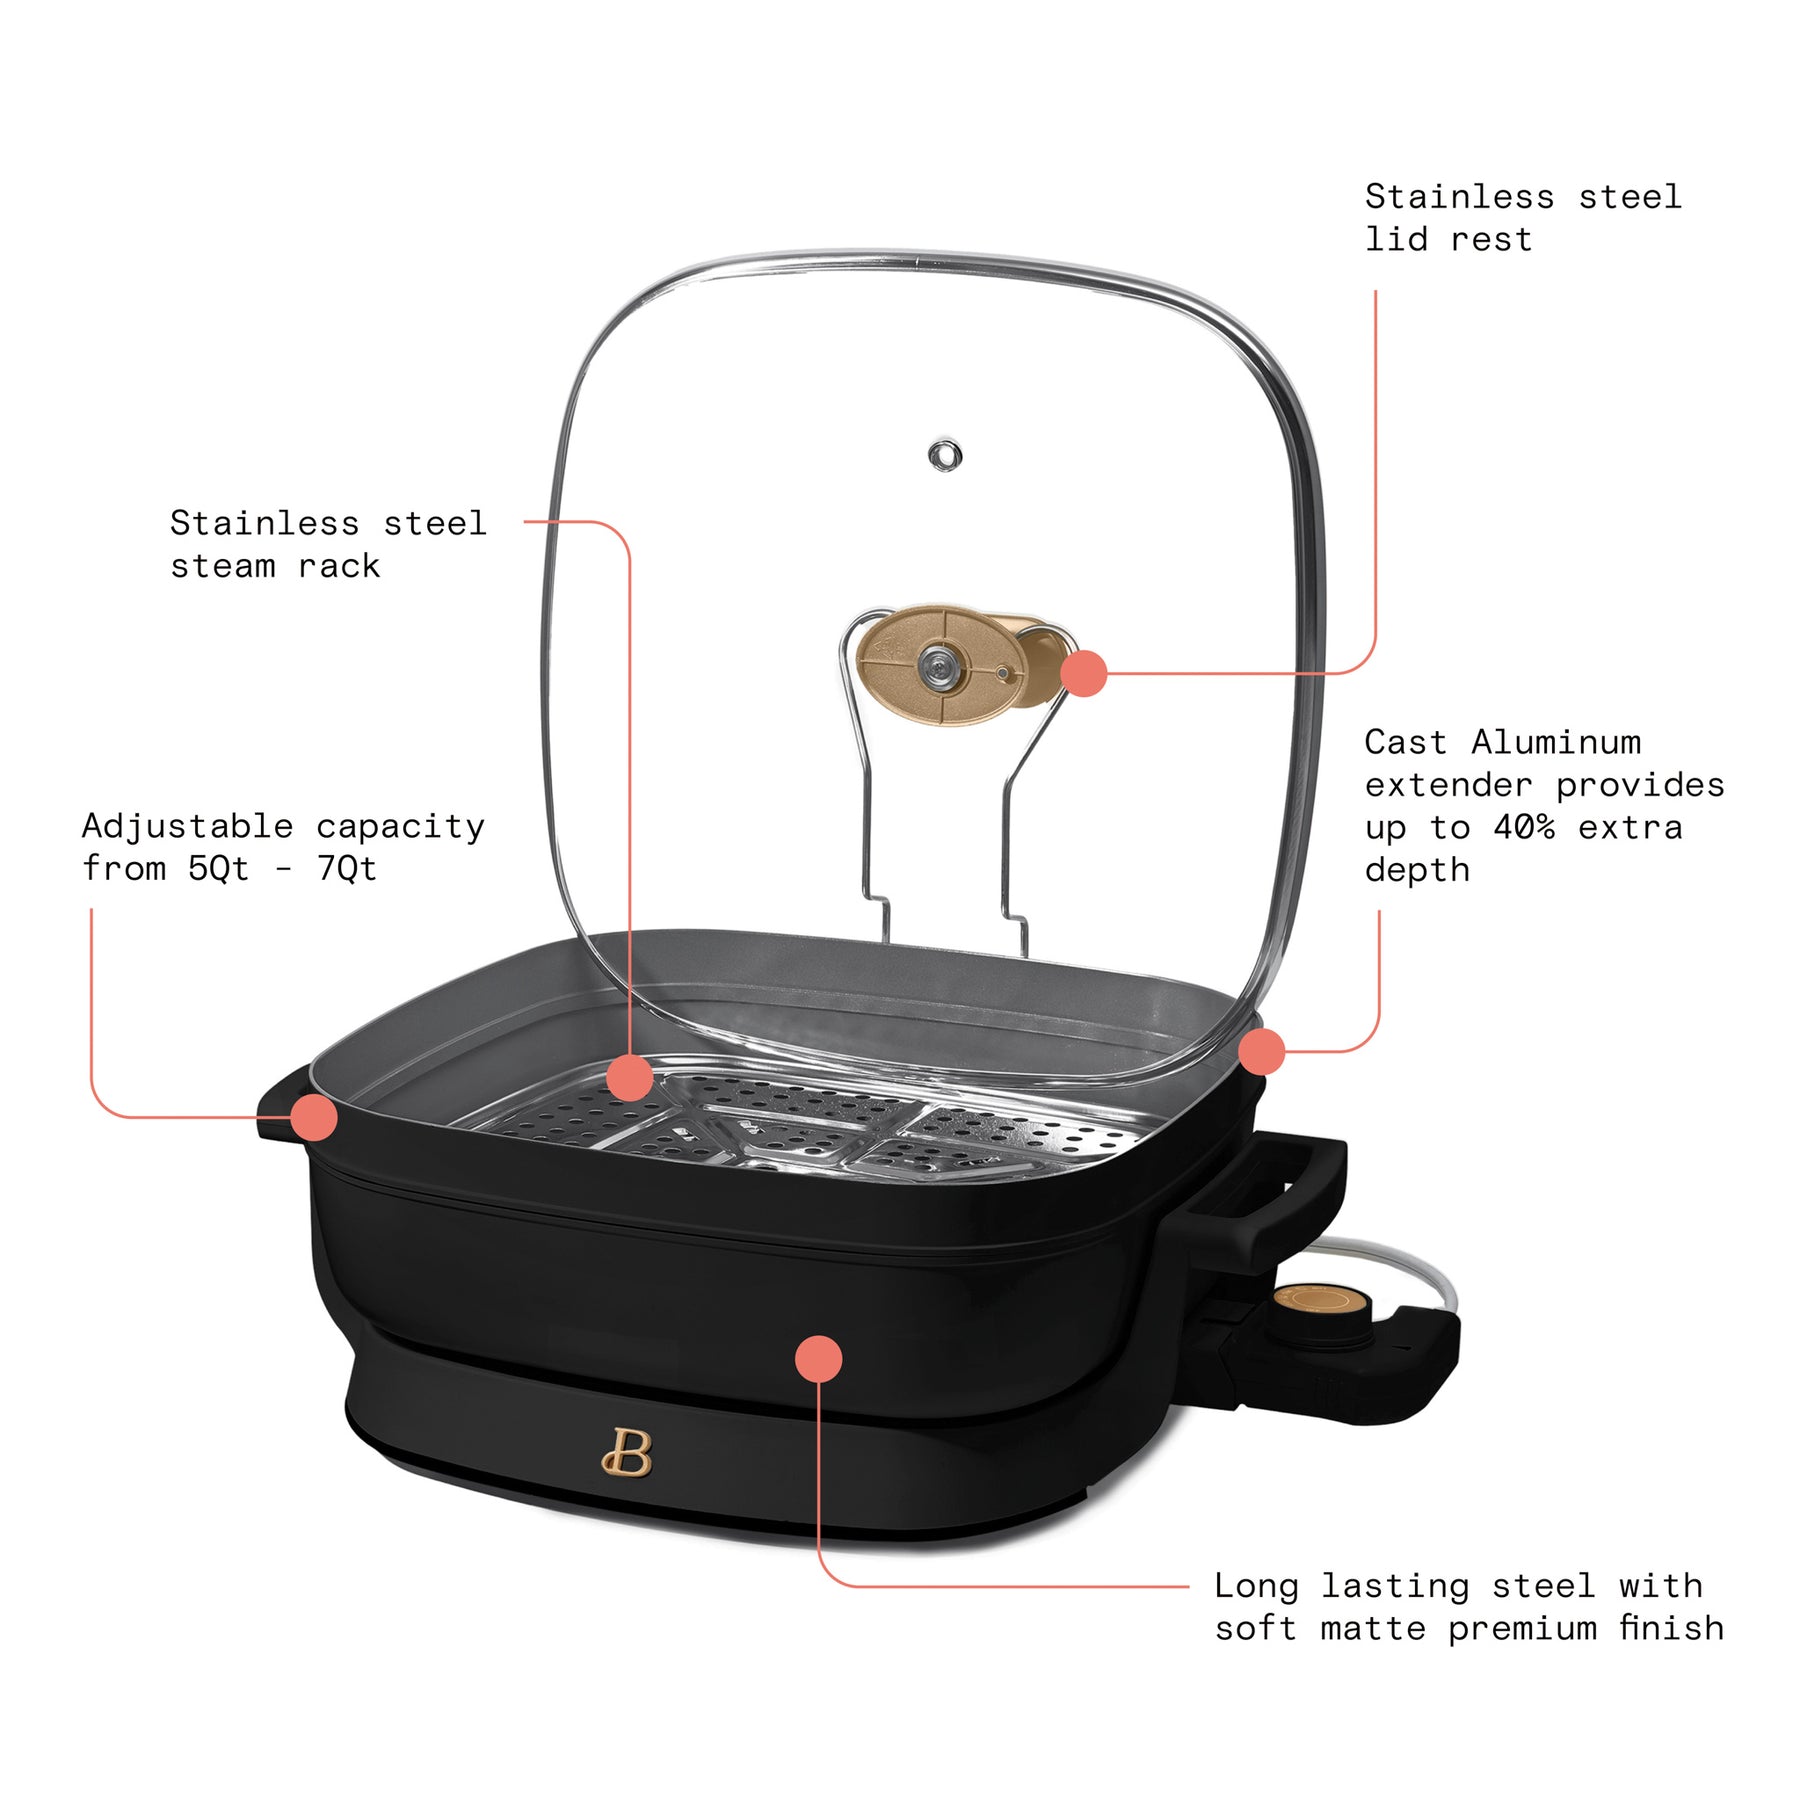 Beautiful 5 in 1 Electric Skillet - Expandable up to 7 Qt with